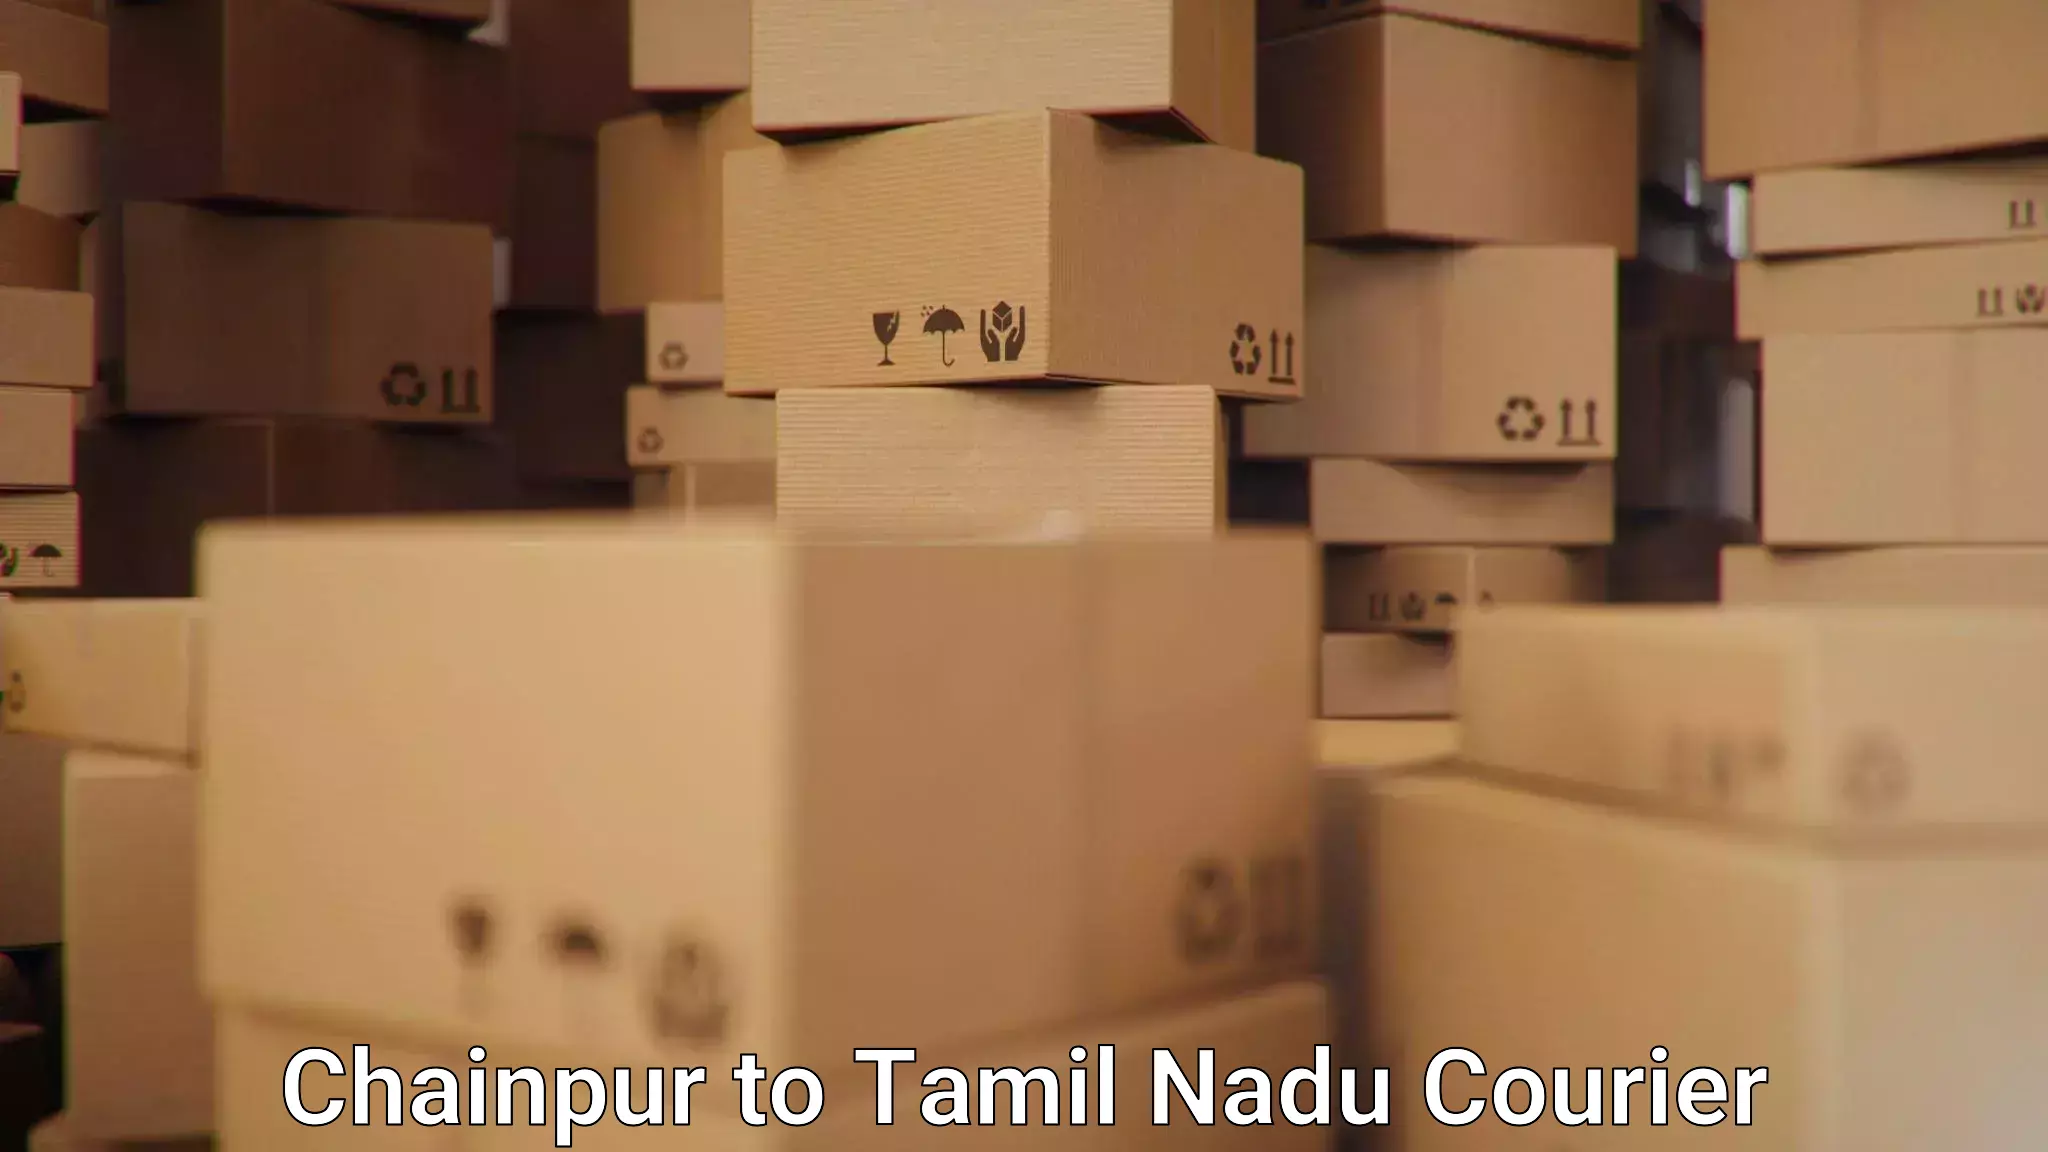 Seamless shipping service Chainpur to Ambattur